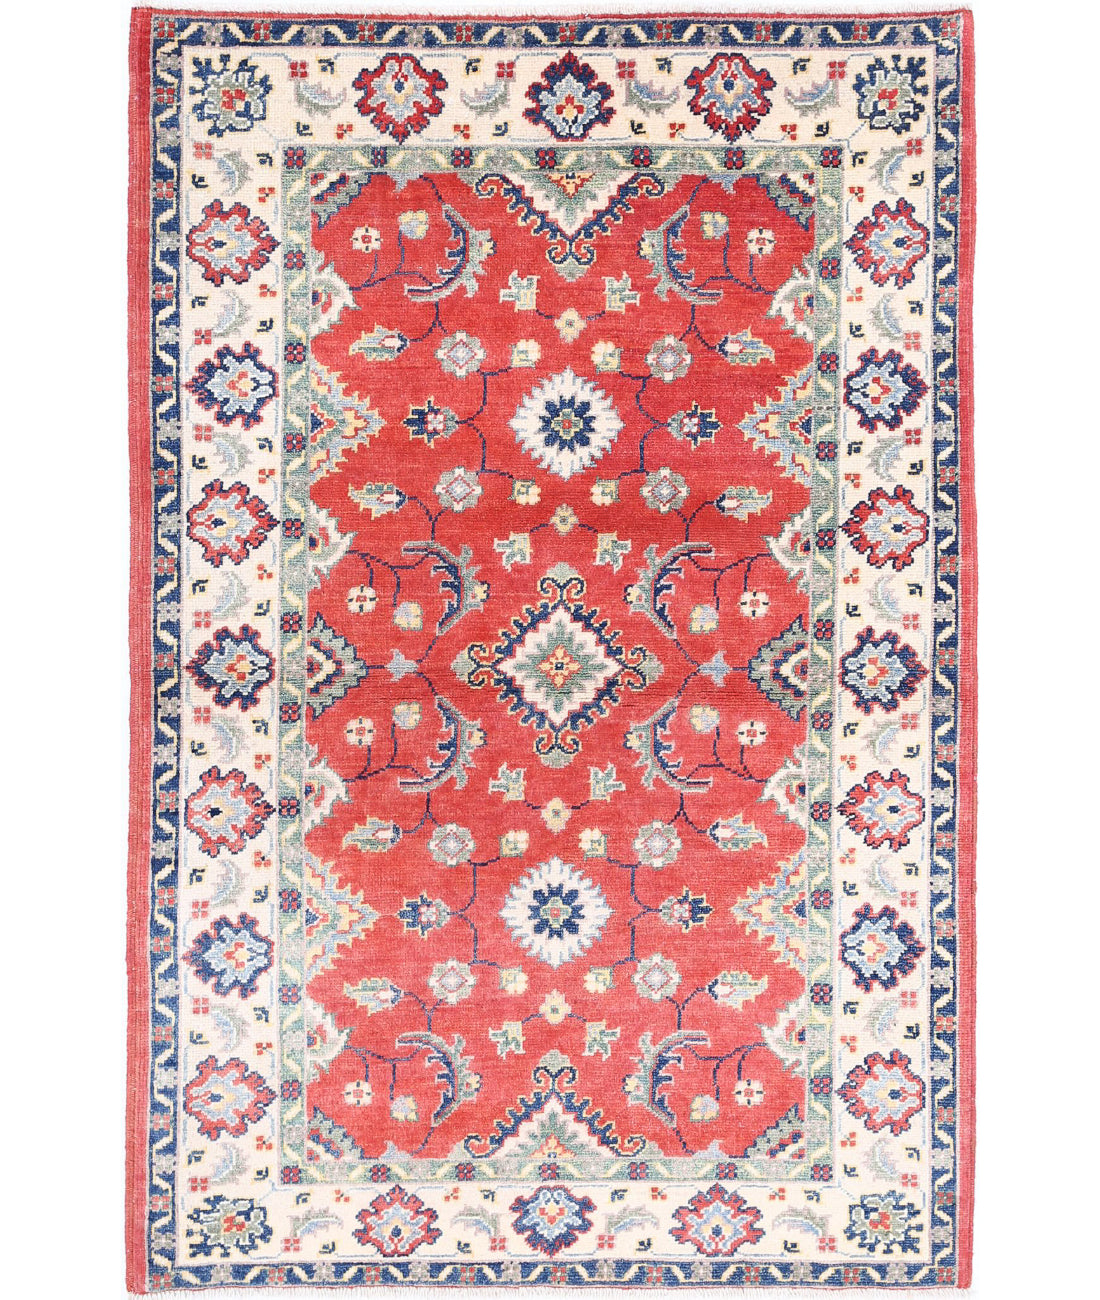 Hand Knotted Tribal Kazak Wool Rug - 3'4'' x 4'9'' 3'4'' x 4'9'' (100 X 143) / Red / Ivory